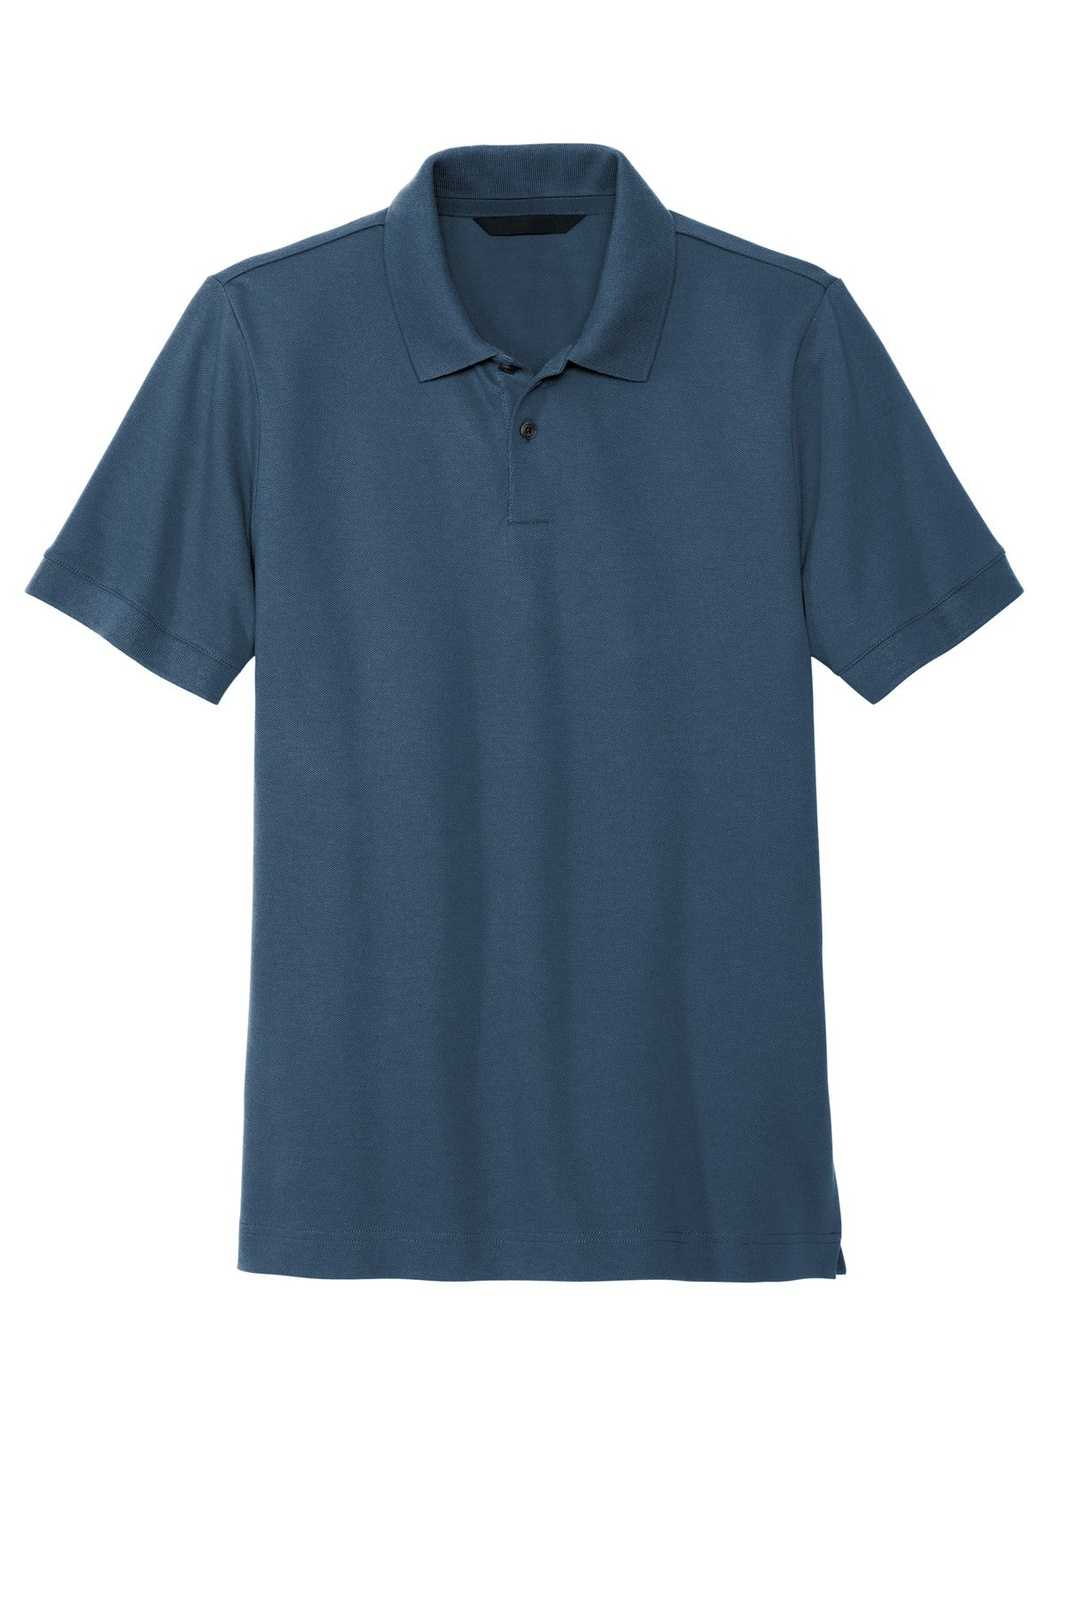 Mercer+Mettle MM1000 Stretch Heavyweight Pique Polo - Insignia Blue - HIT a Double - 1